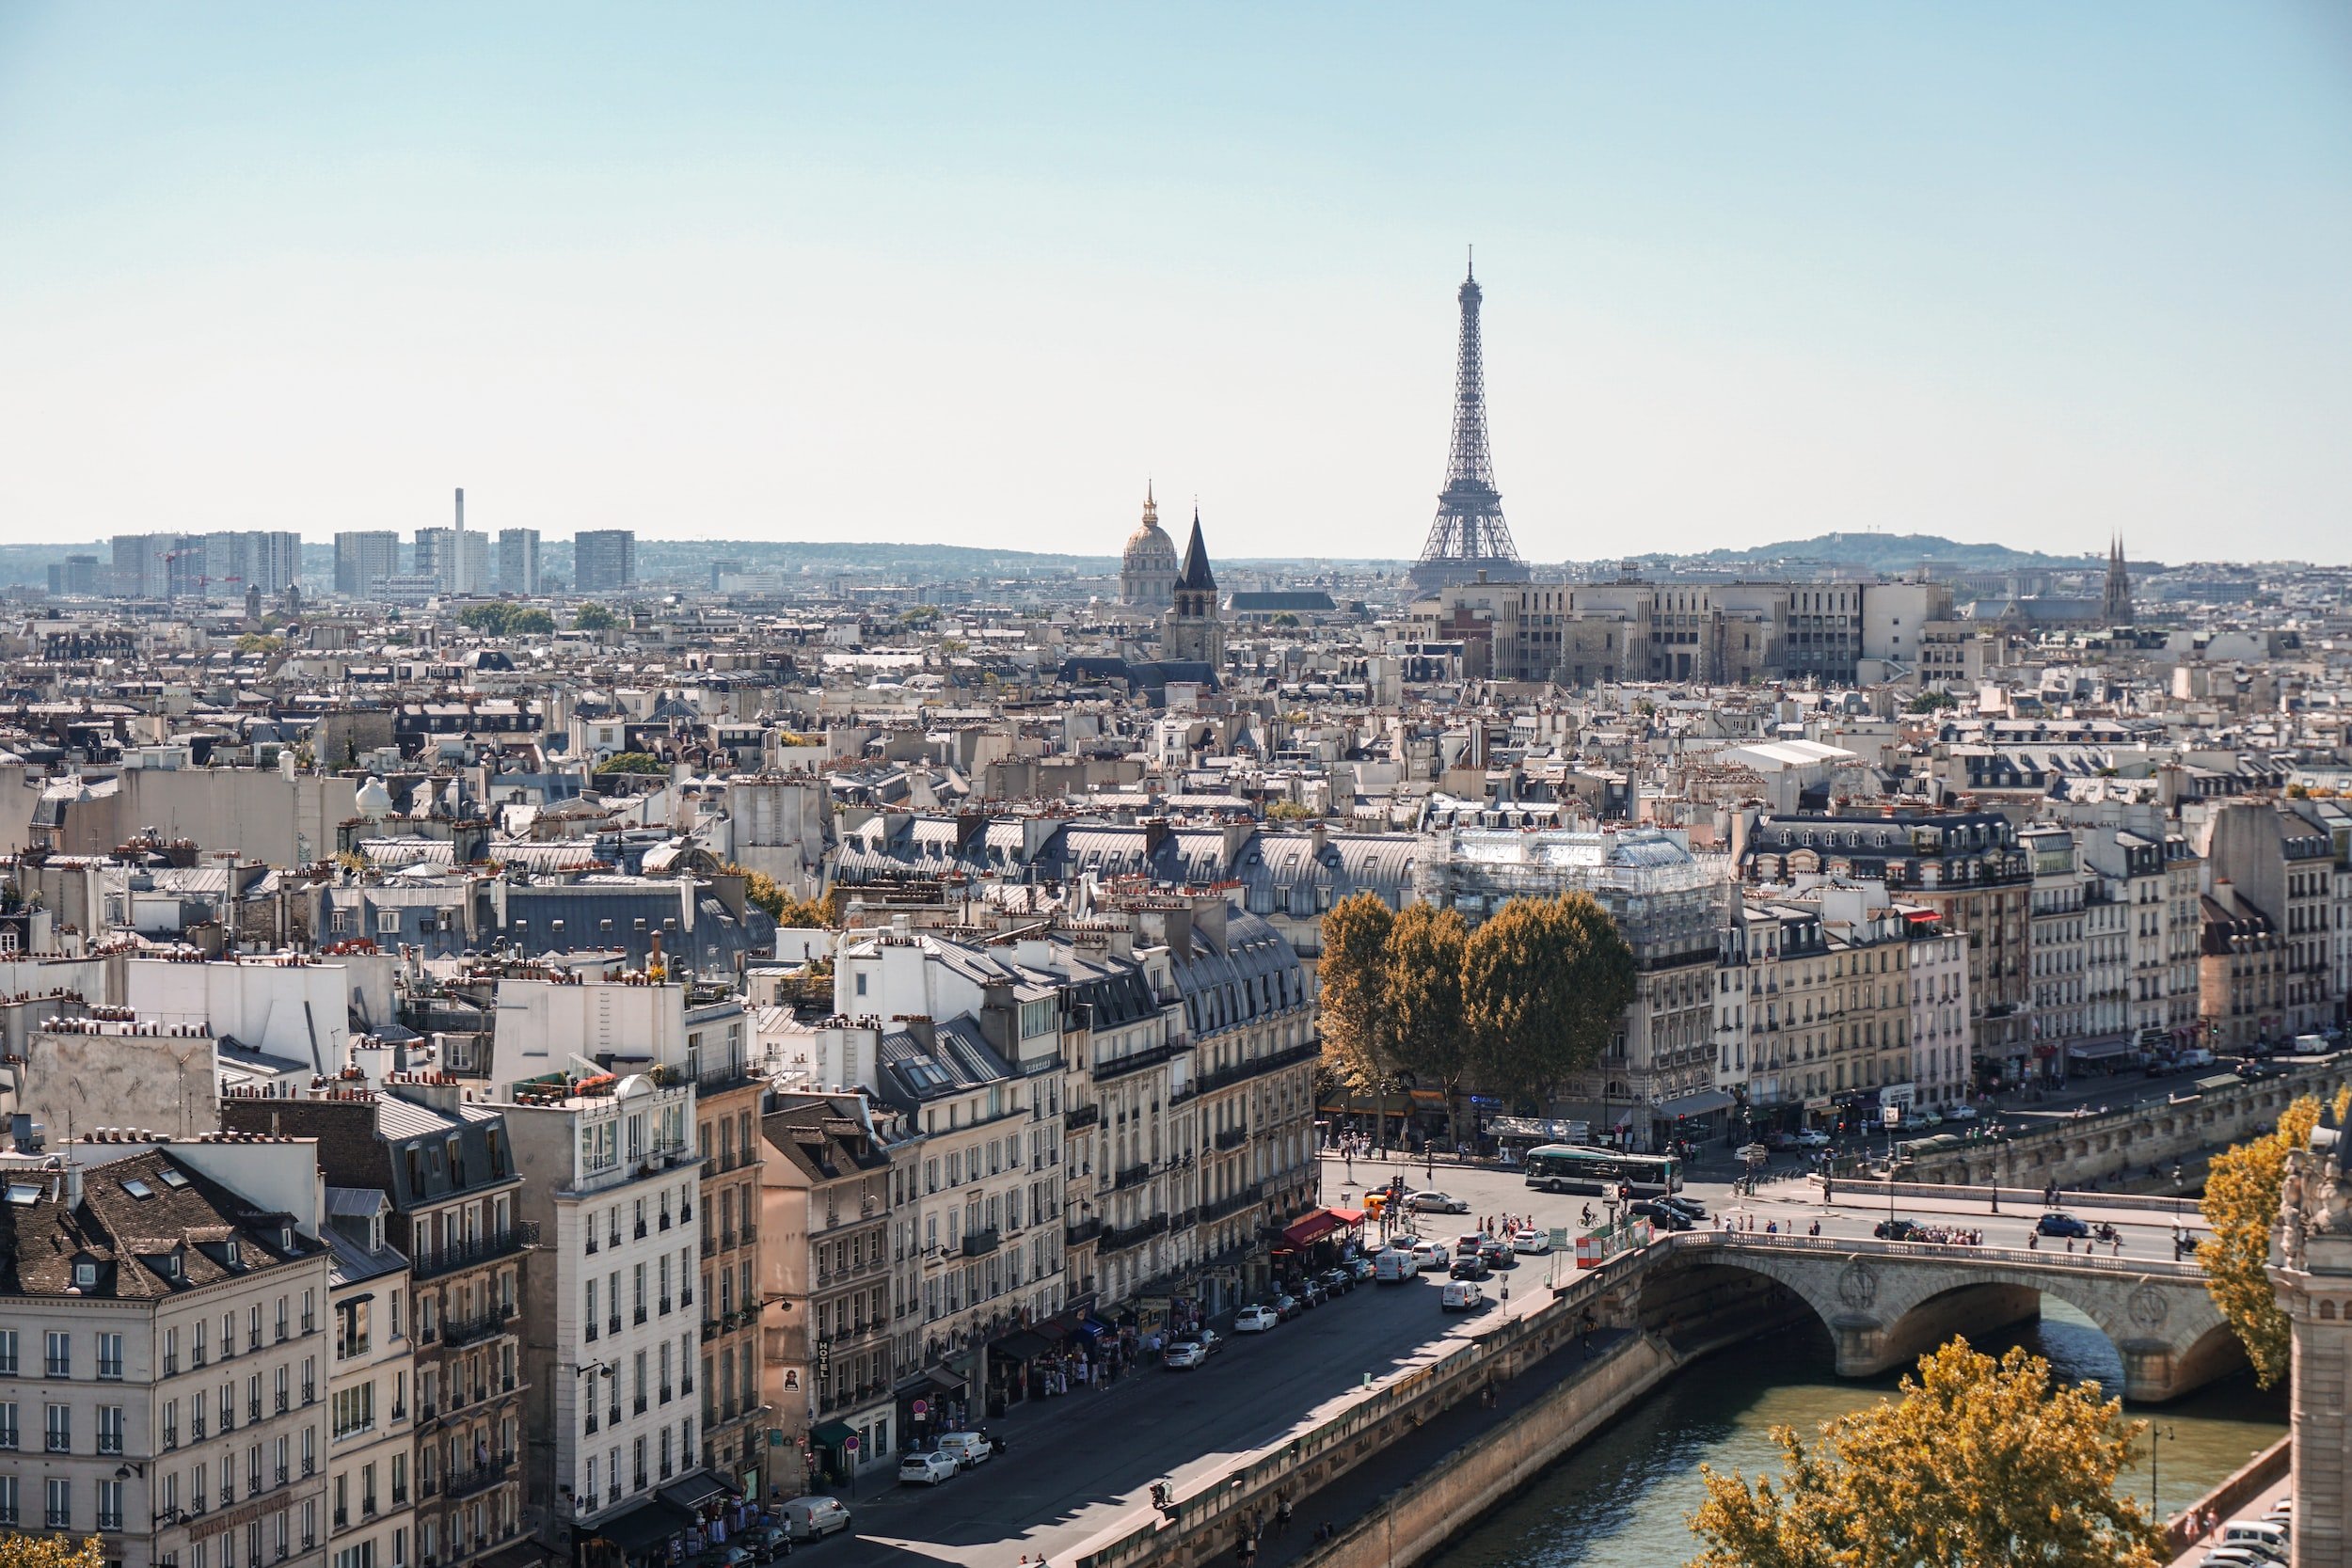 Visit Paris from your exceptional apartment overlooking the Eiffel Tower